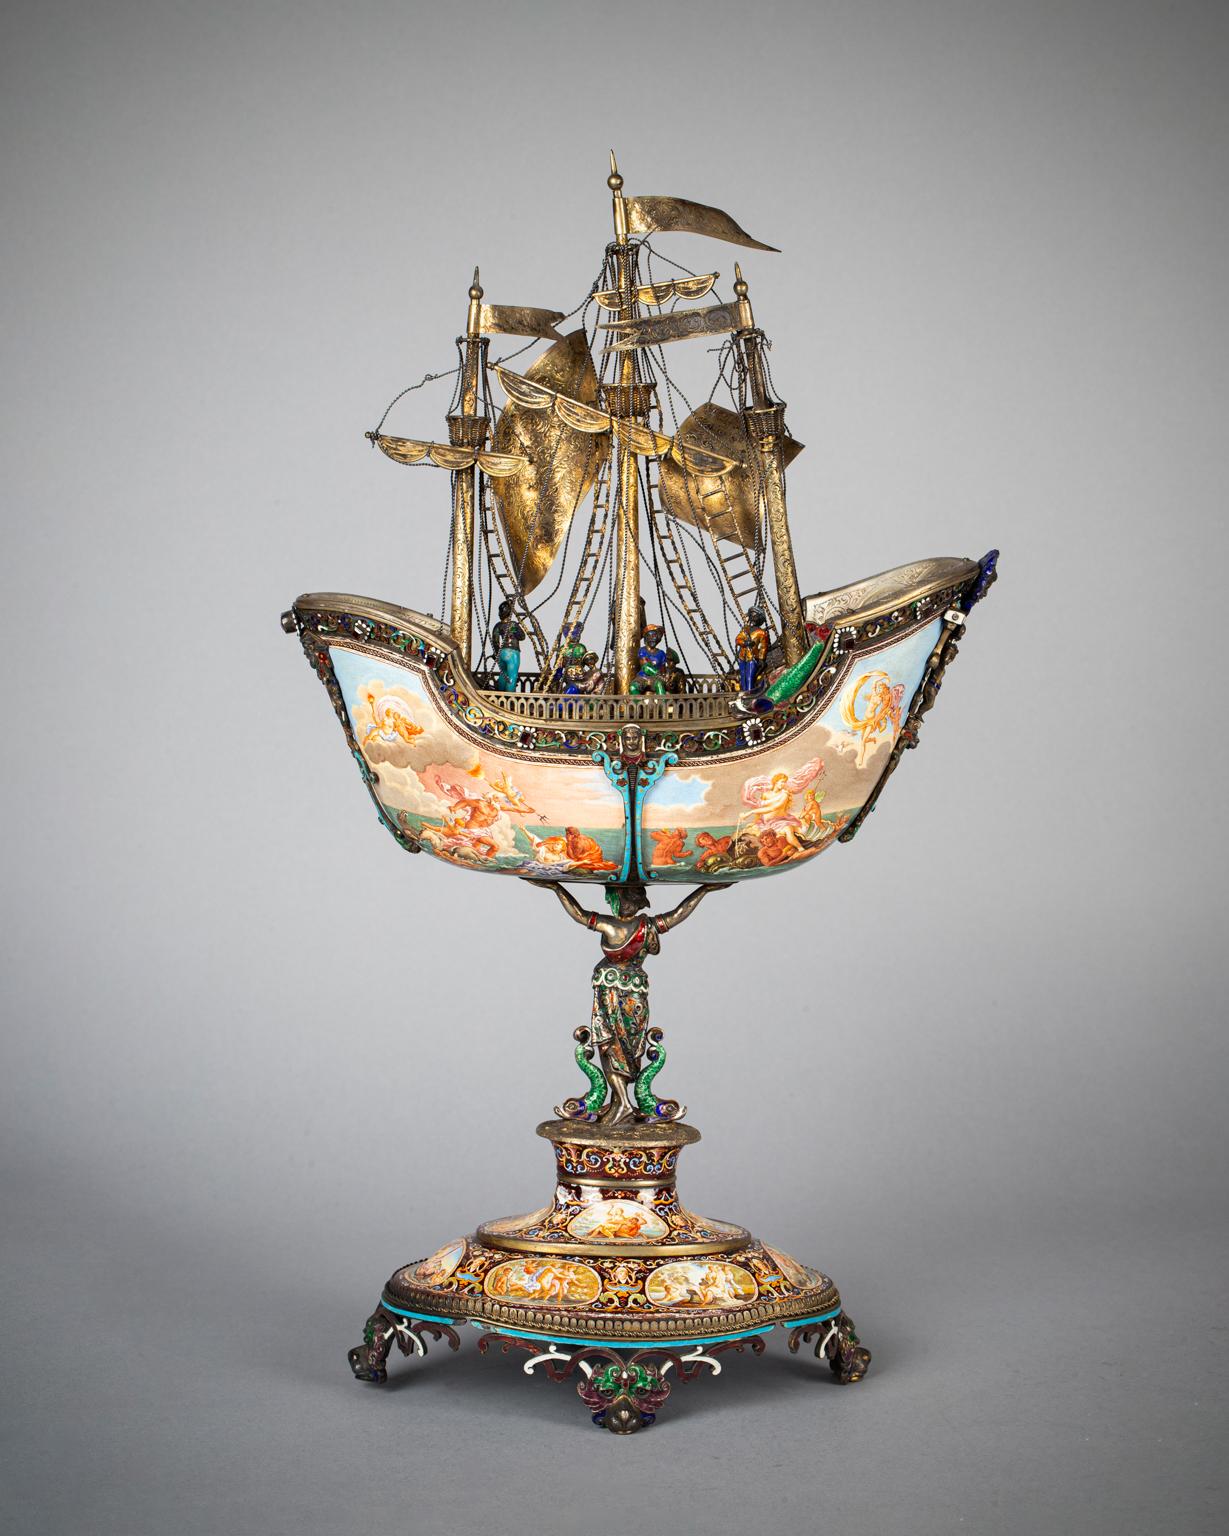 Finely enamelled in large and small panels with mythological scenes relating to water, the silver and enamel figural decoration further embellished with masks, dolphins and strapwork.